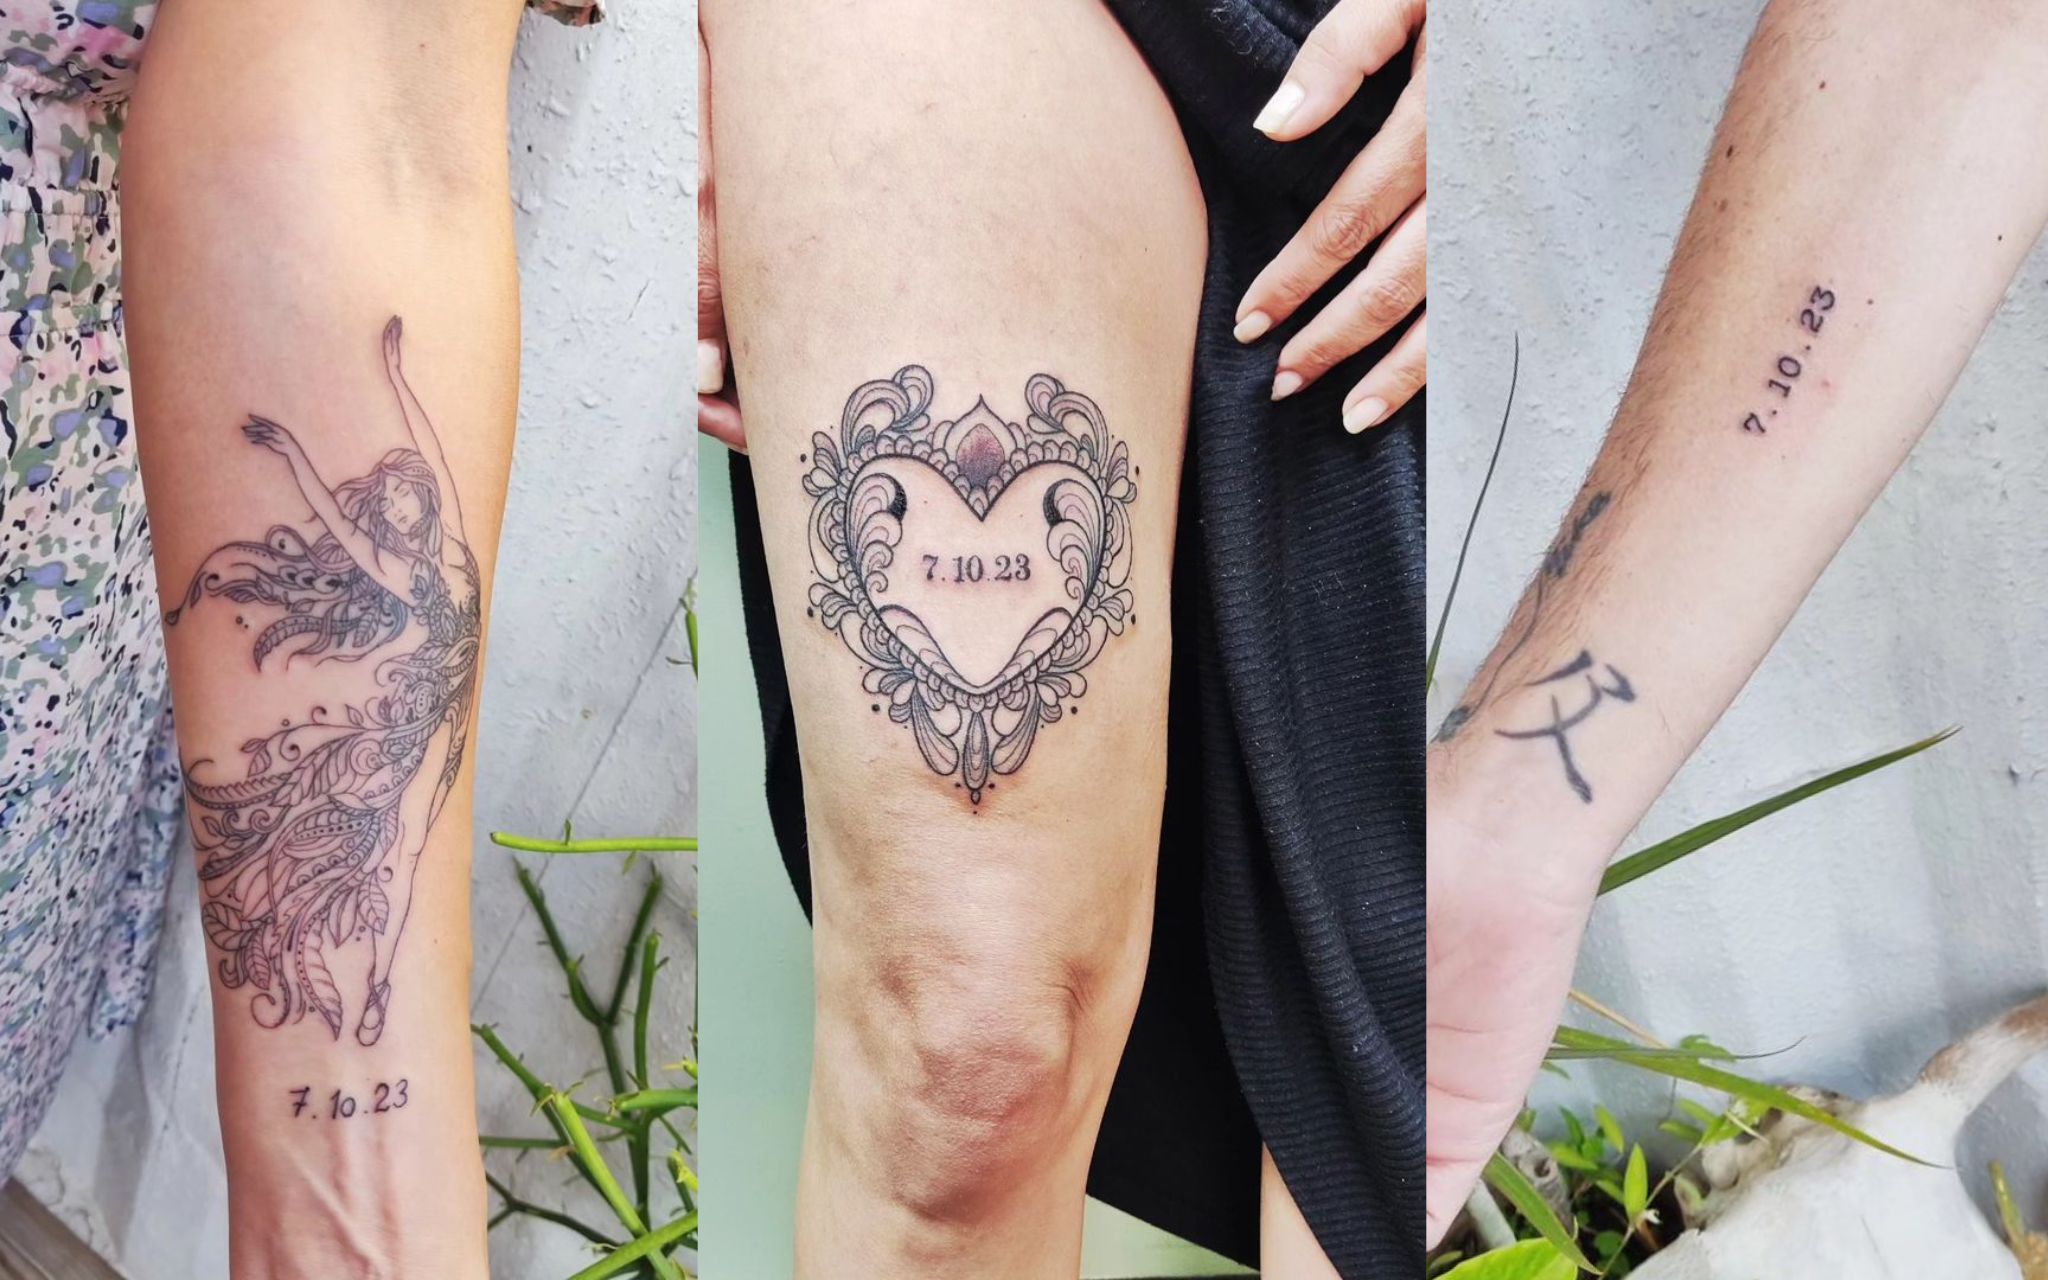 Pierre-Yves, 30 year old sports trainer, got tattooed with the Paris city  motto 'Fluctuat Nec Mergitur', which means 'Tossed but not sunk'. He got  his tattoo by Gumo tattoo artist one day